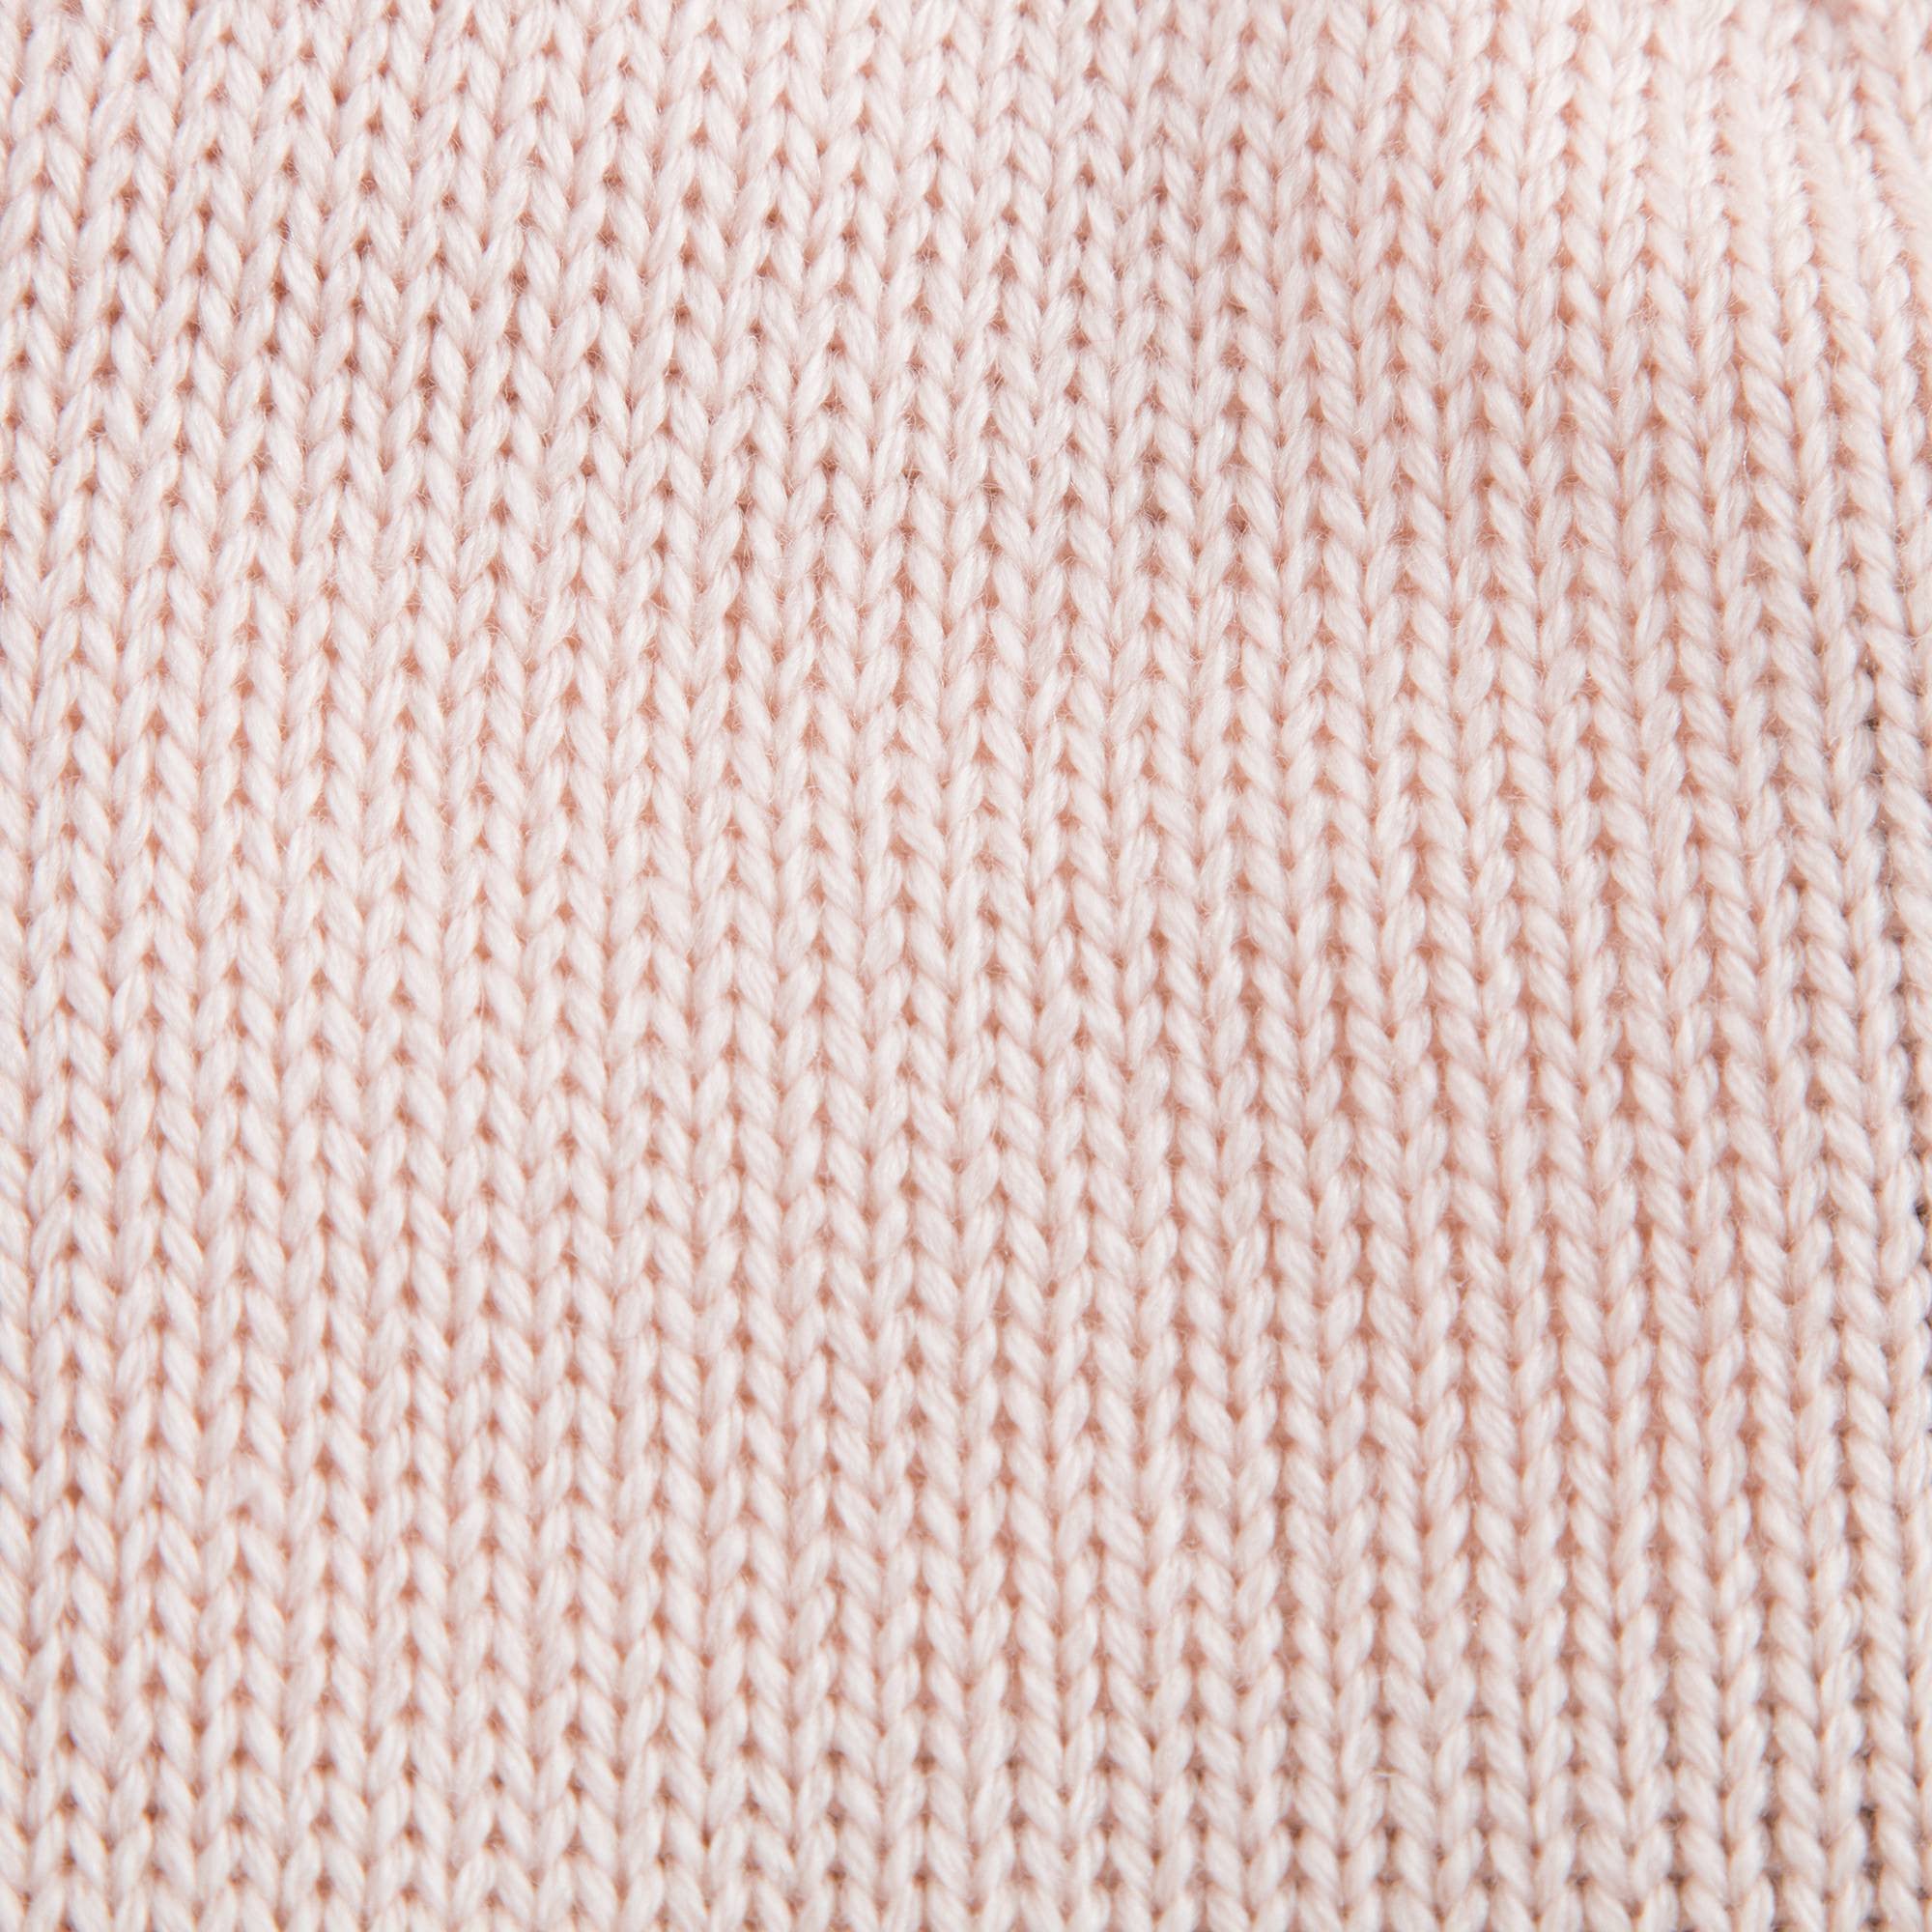 Baby Pink Knitted Hat With Ears